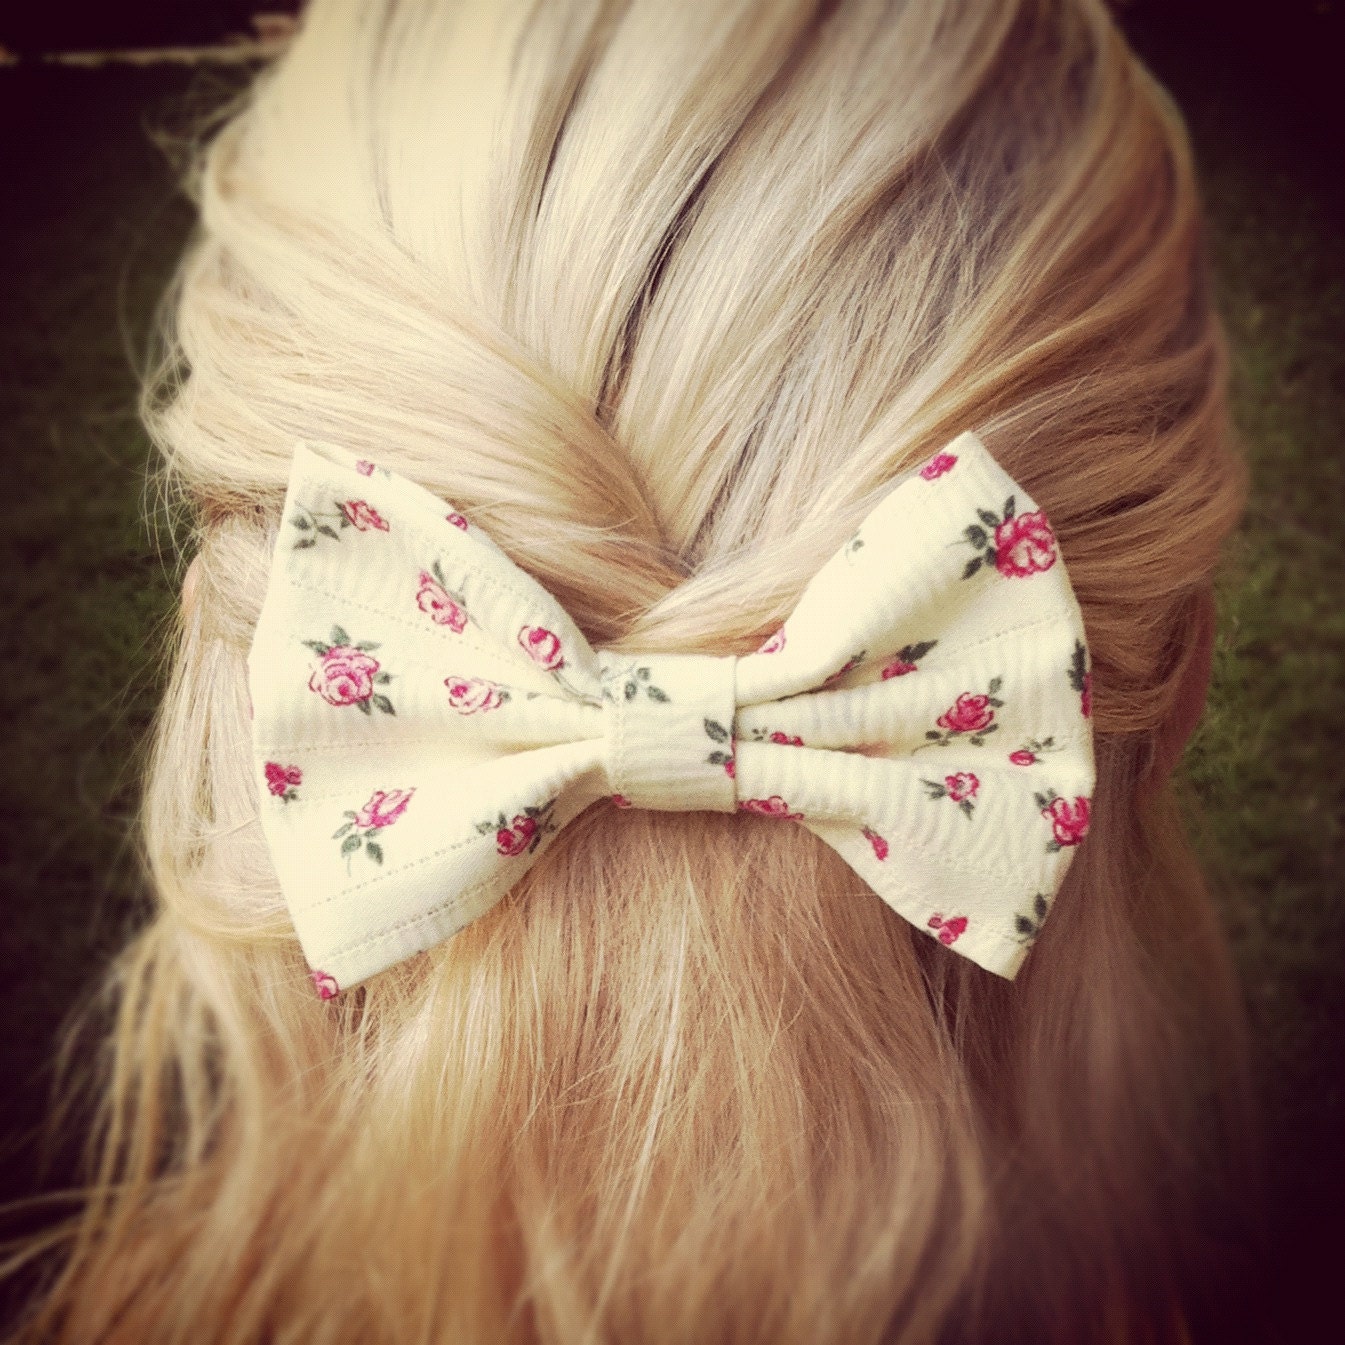 THE LAST ONE  floral hair bow - Banana yellow